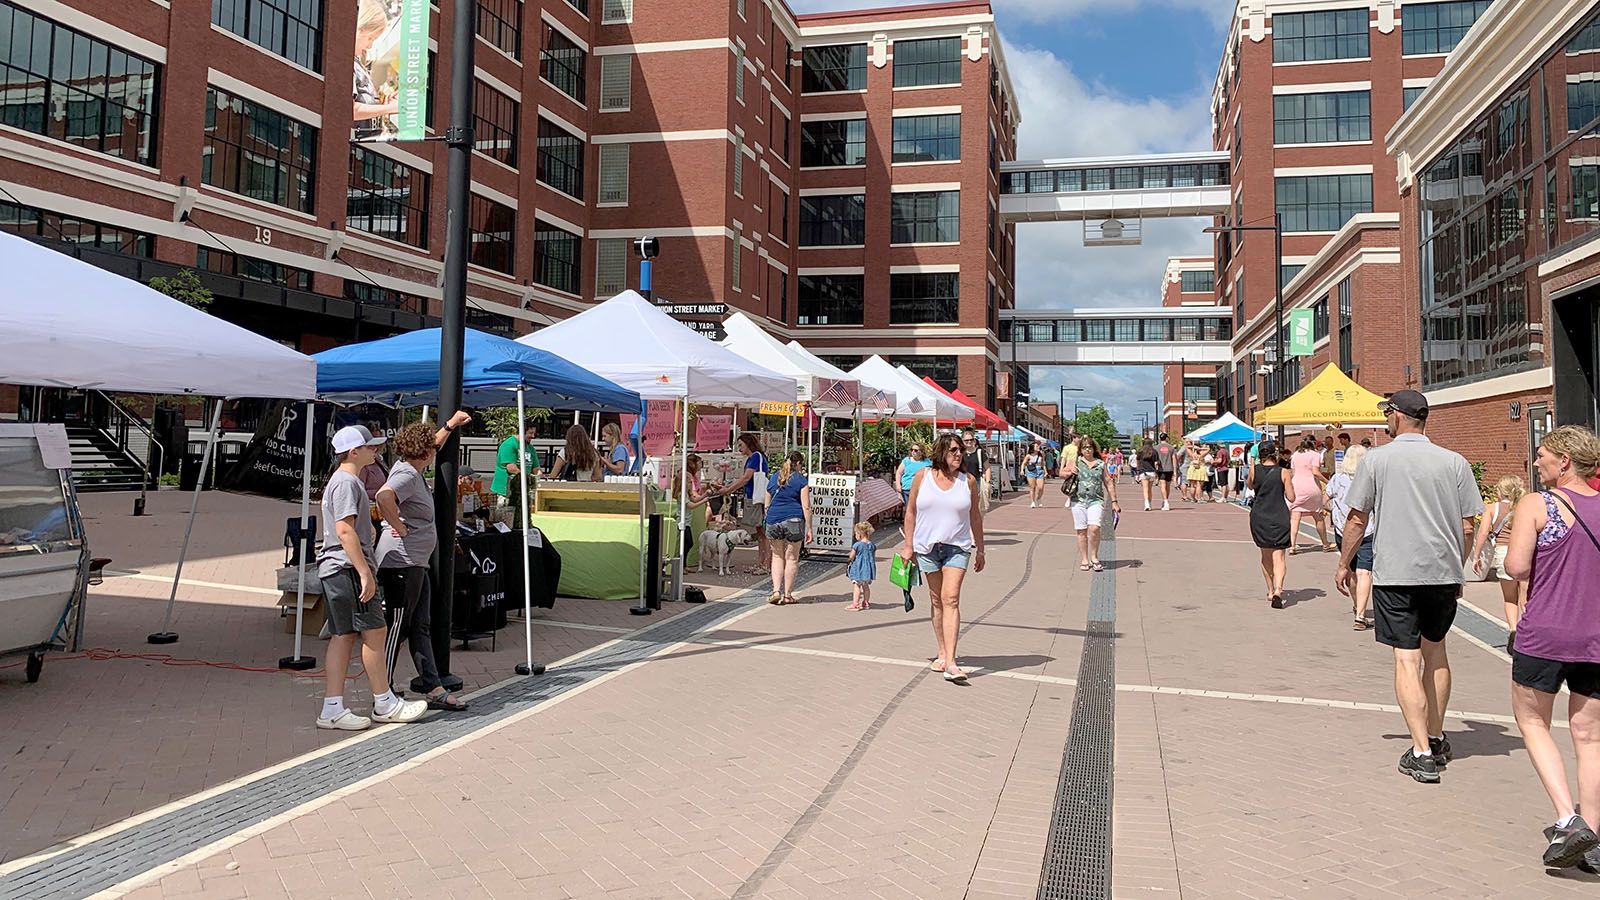 Swing by Electric Works to enjoy all Ft. Wayne’s Farmers Market has to offer.